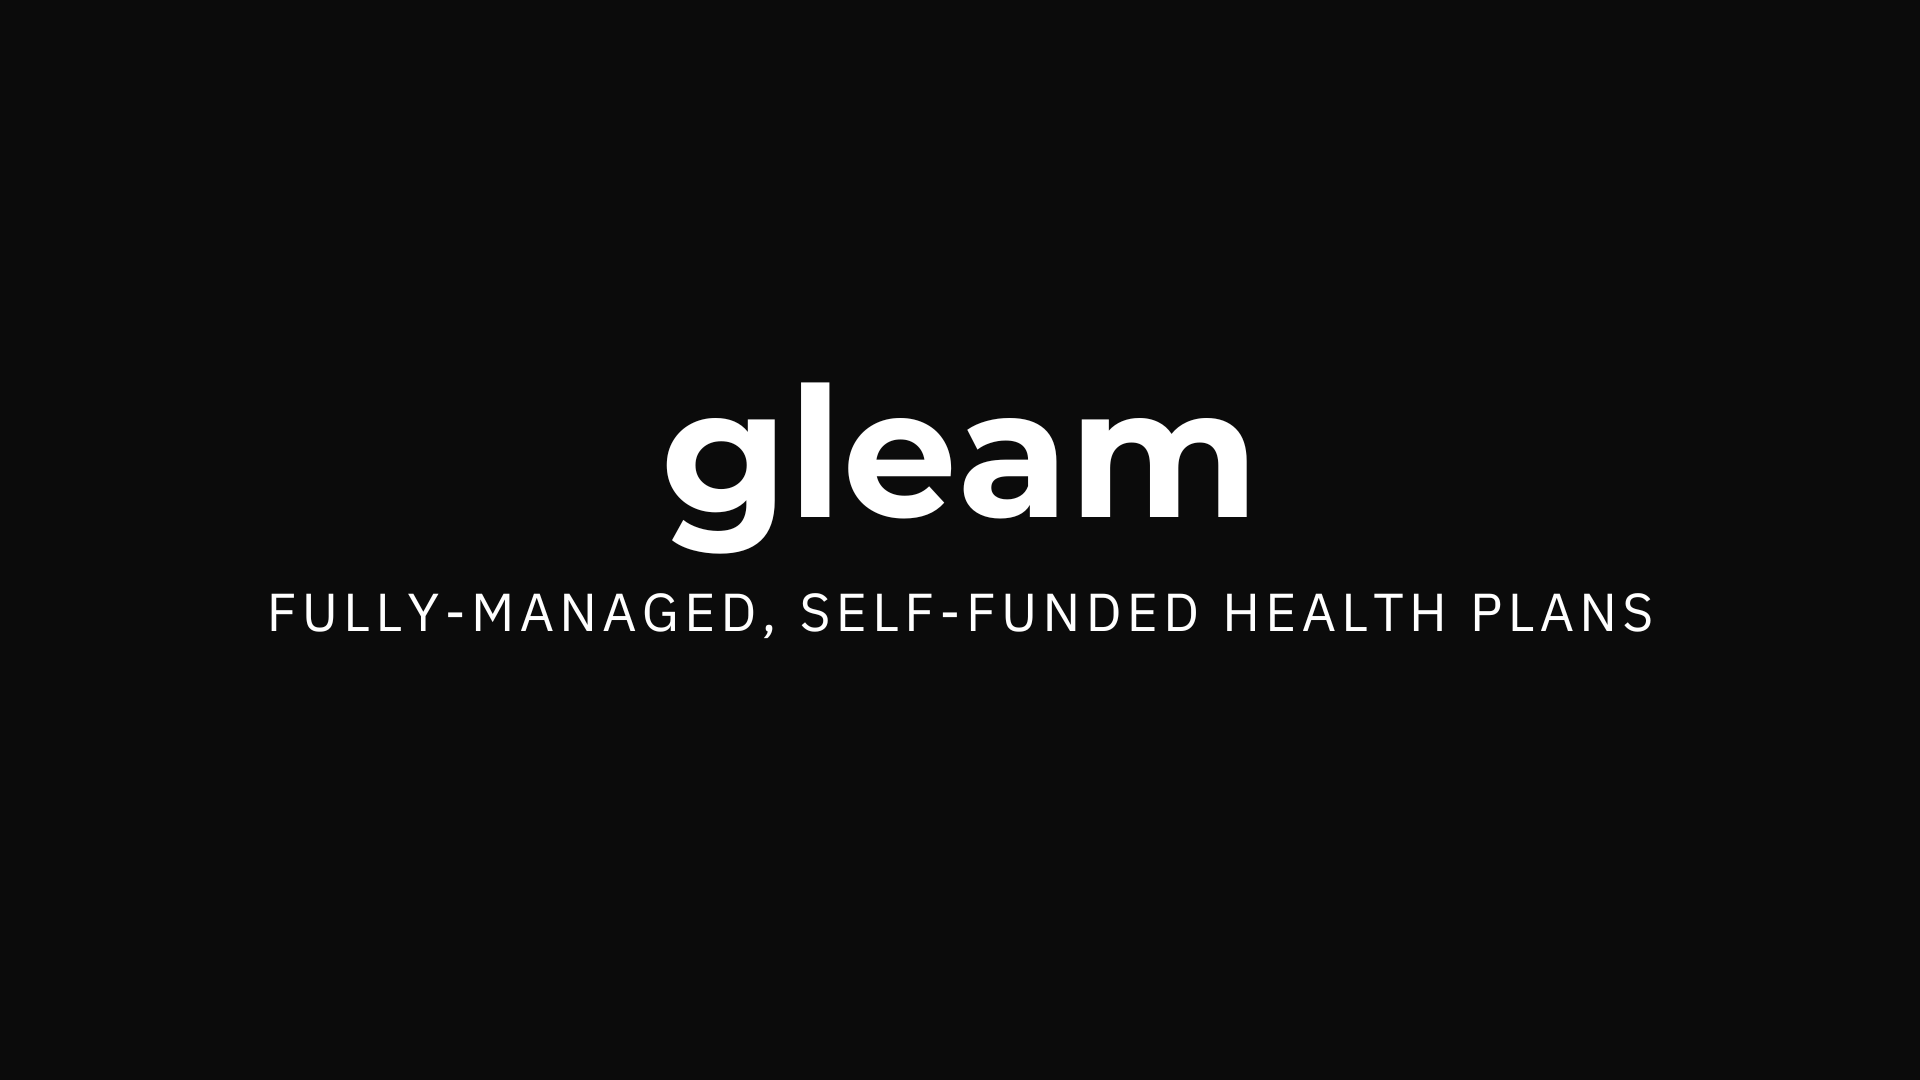 Revolutionizing Health Insurance for Small Businesses: Gleam's Mission